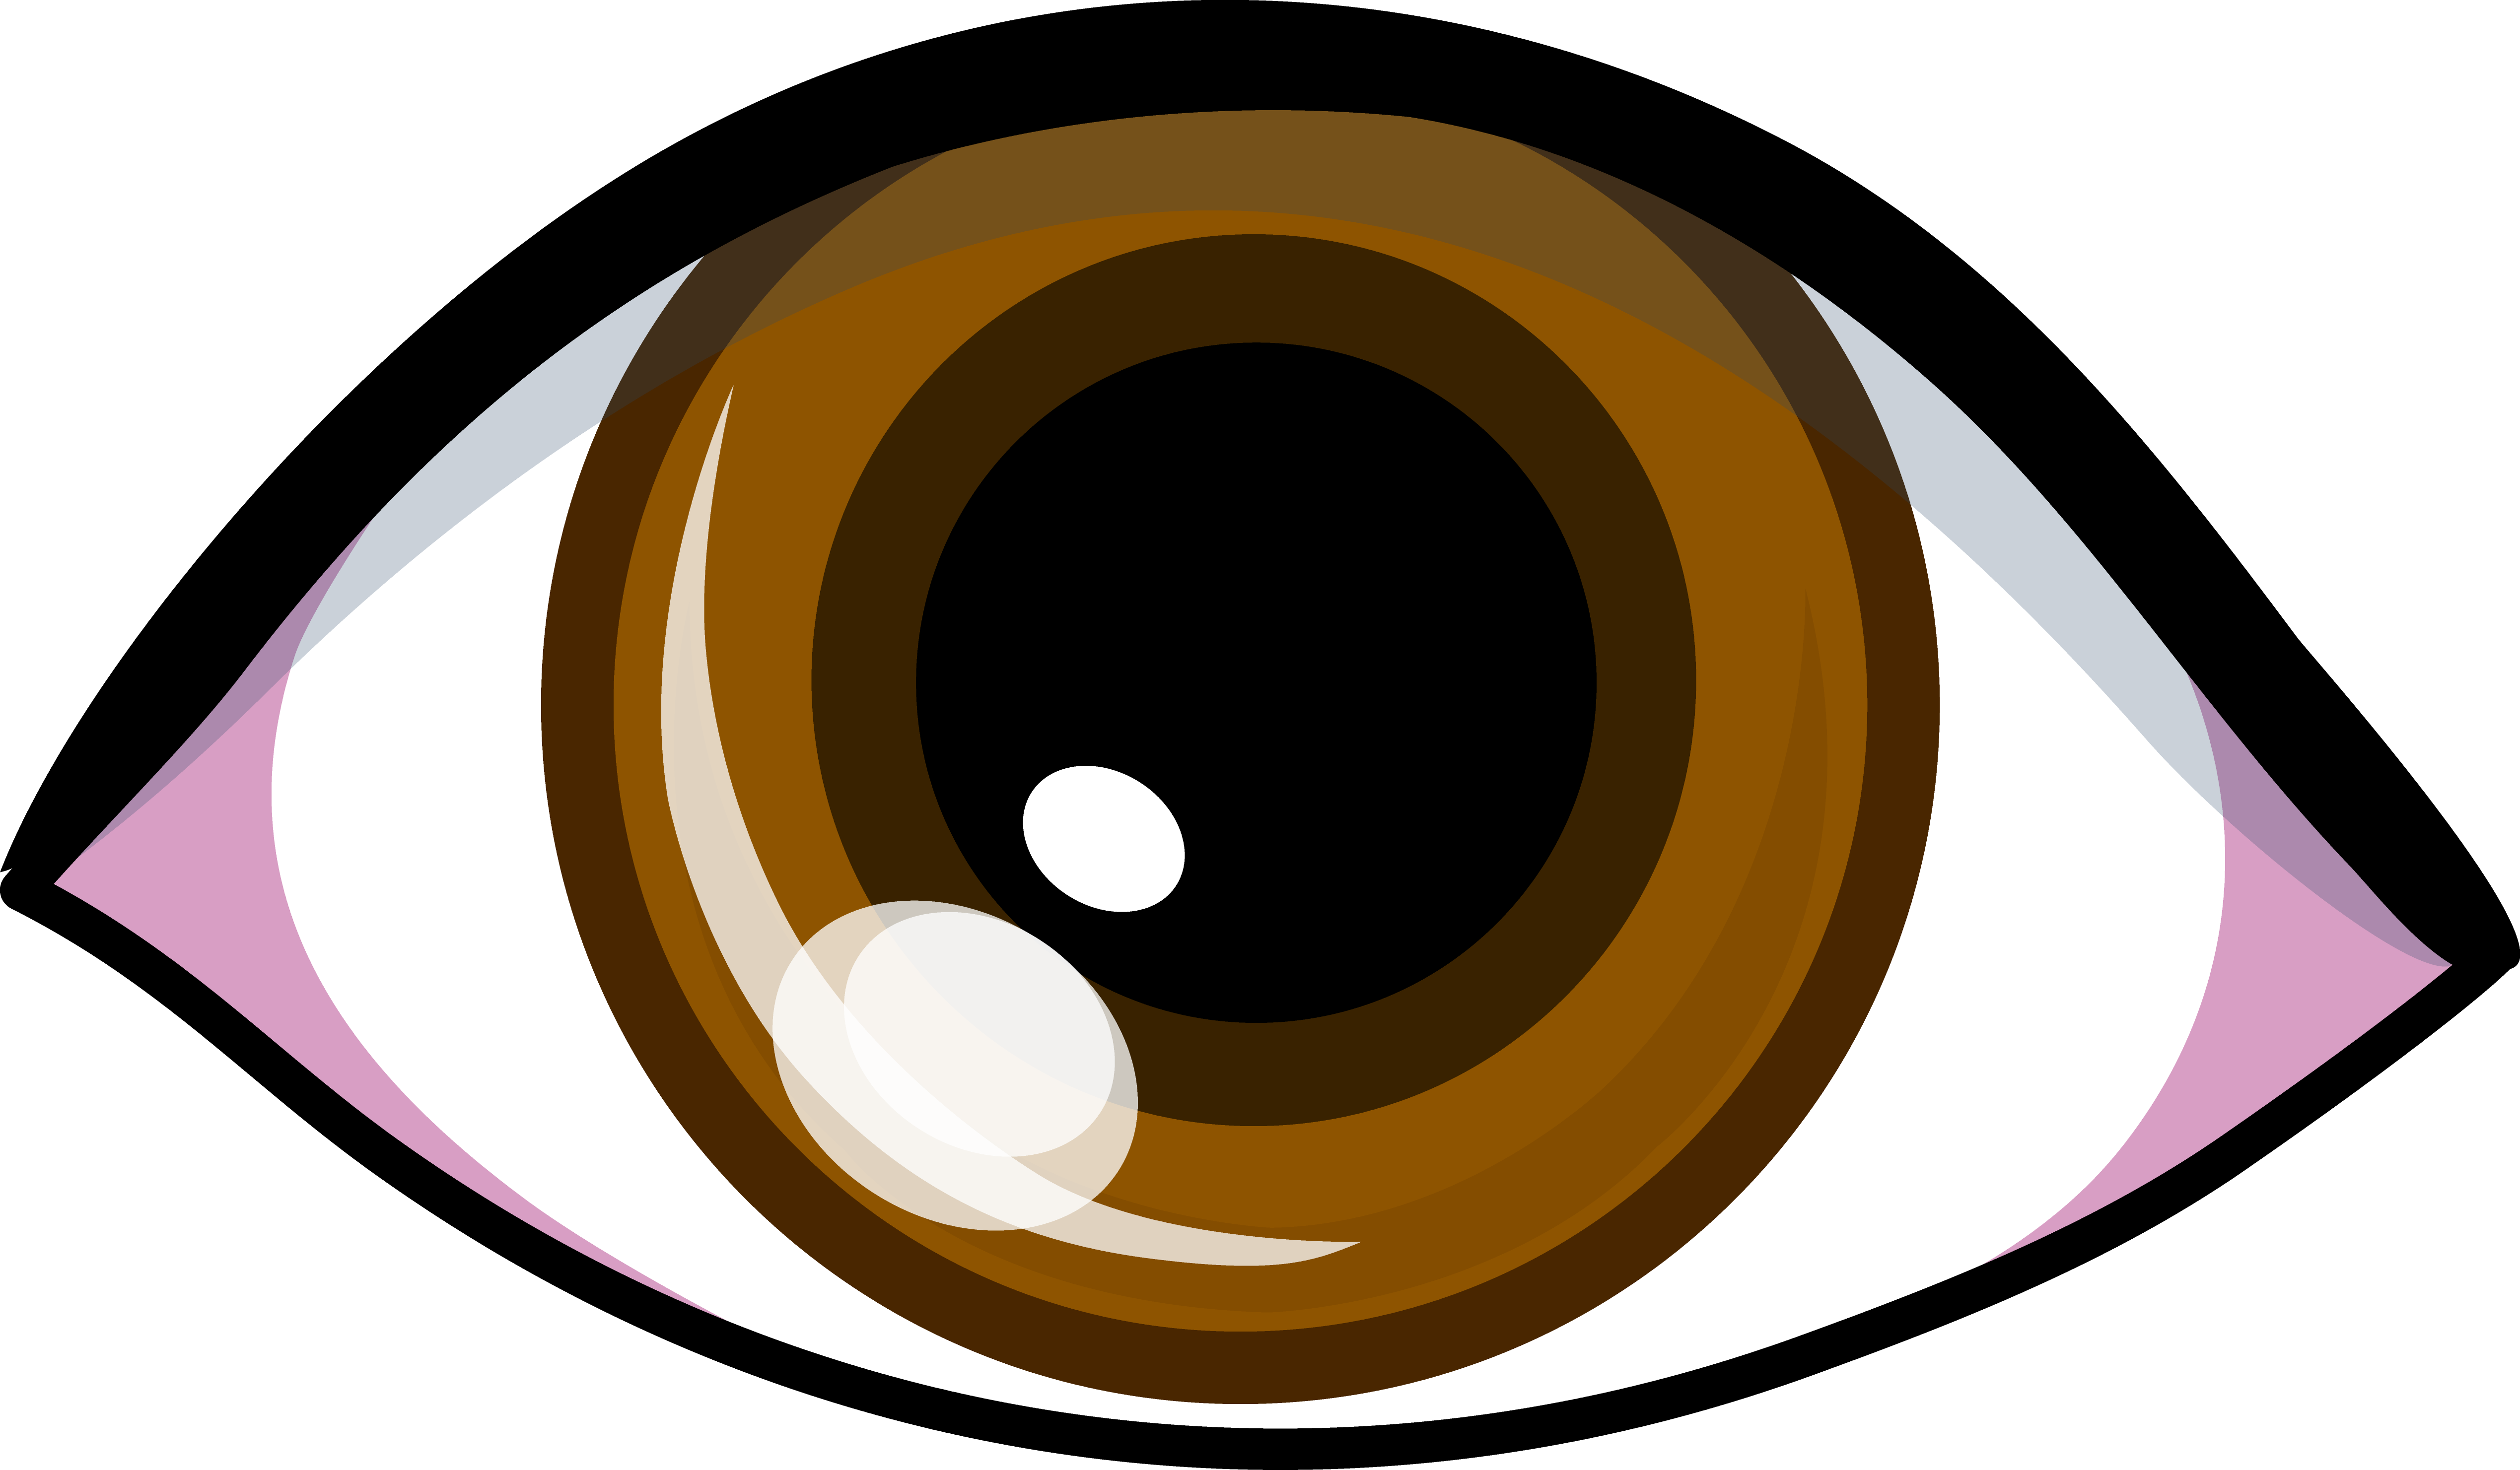 Brown Eyes Clipart - Free Clipart Images